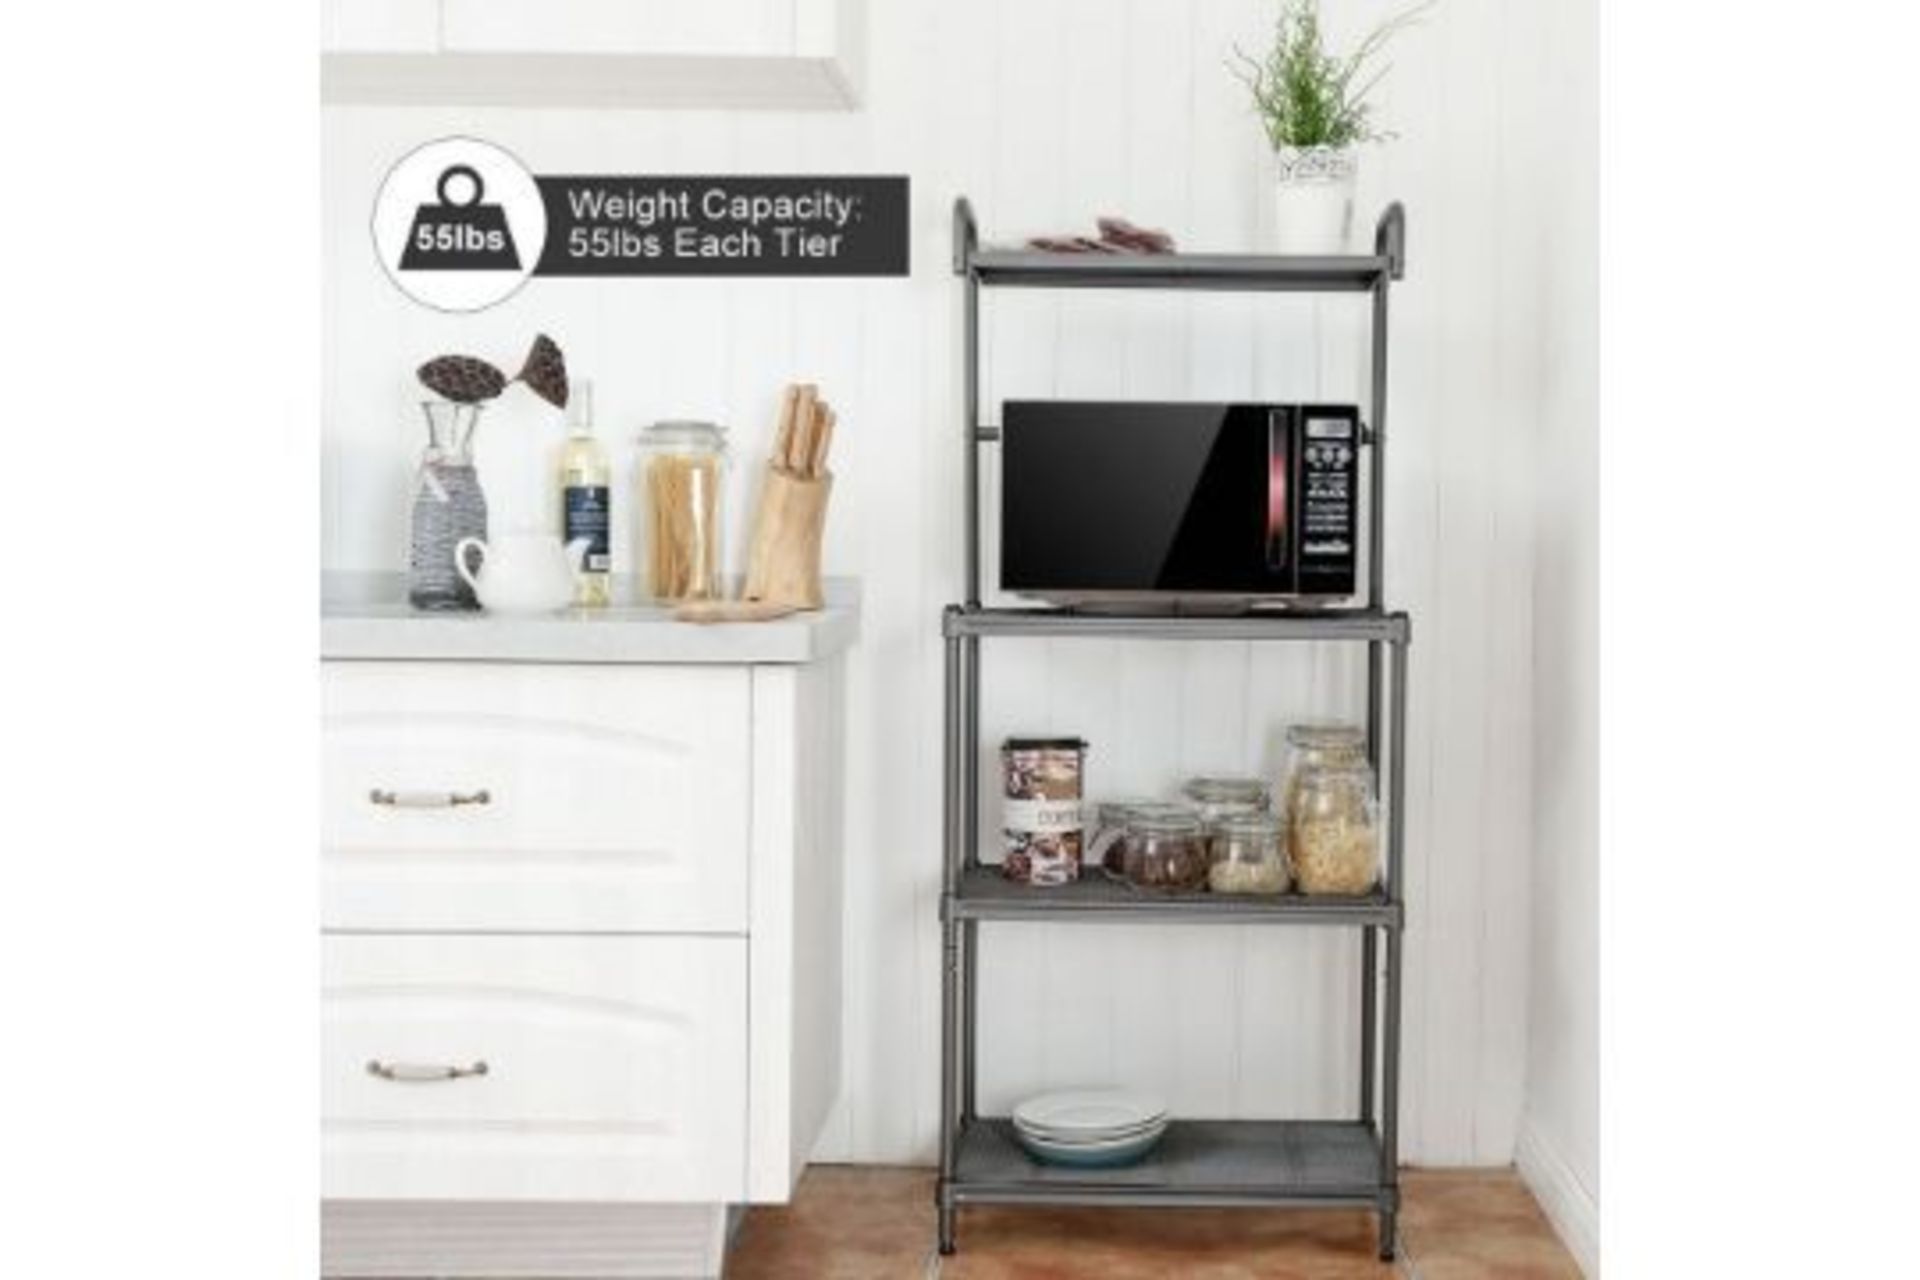 4-Tier Baker'S Rack Stand Shelves Kitchen Storage Rack Organizer. - R14.3. Whether you are selecting